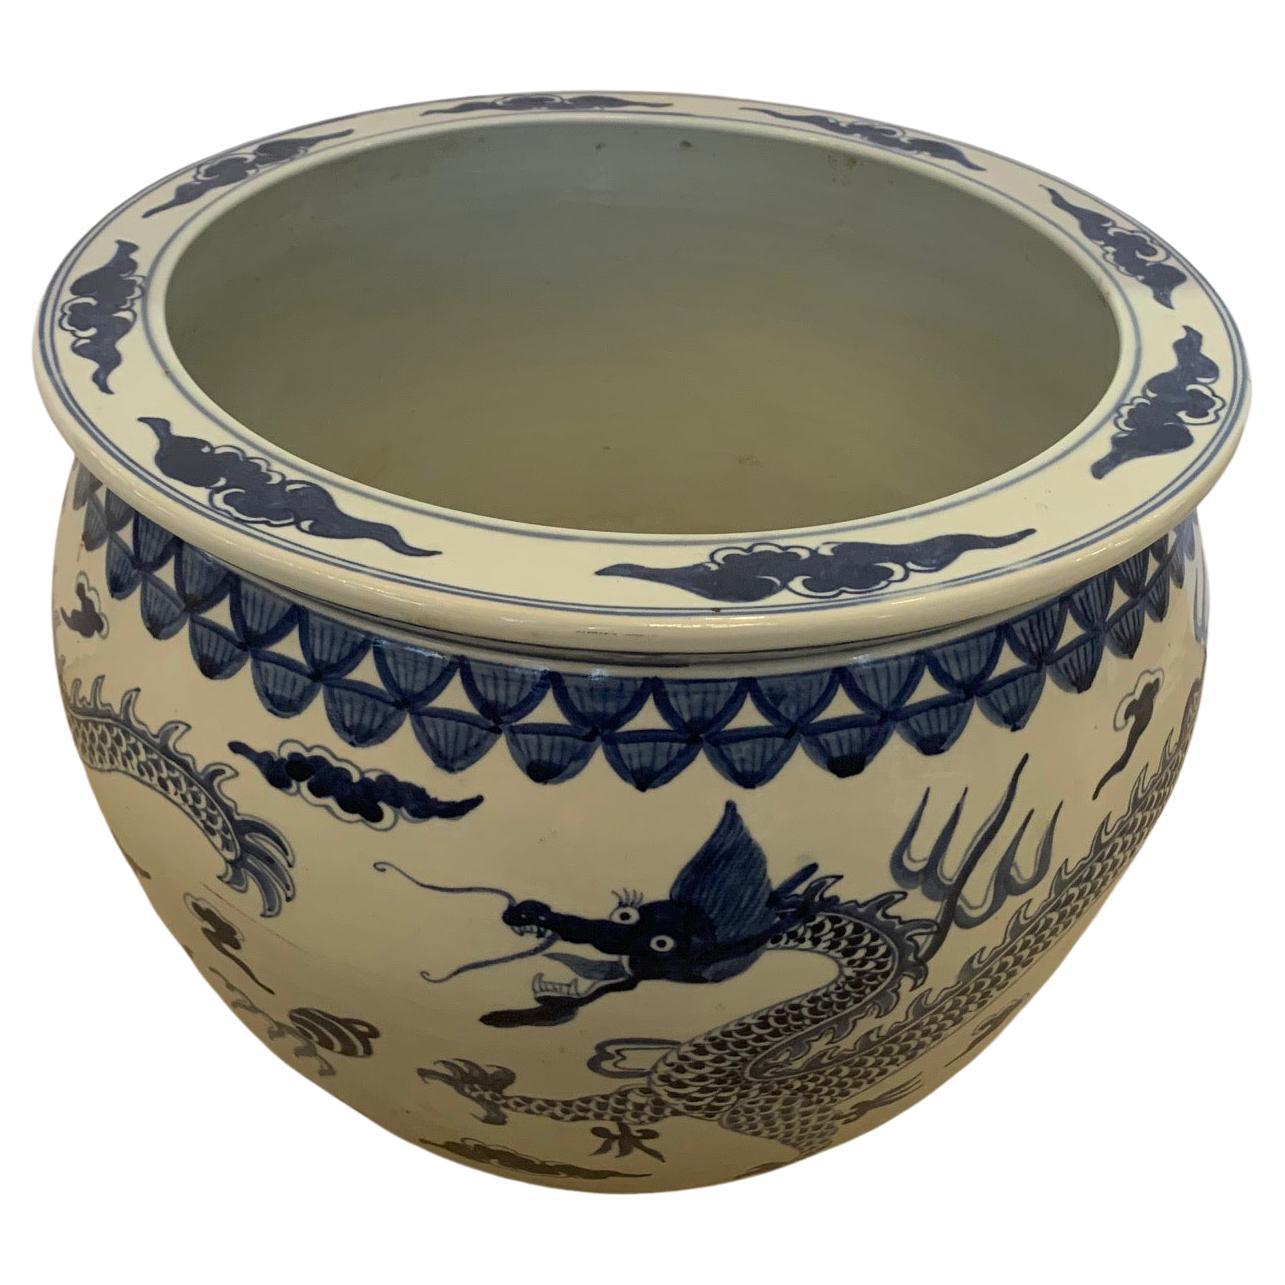 Classic pair of Chinese blue and white planters, each with its own unique decoration, which adds interest to the pairing.
One has figural design with pagodas; the other dragons.